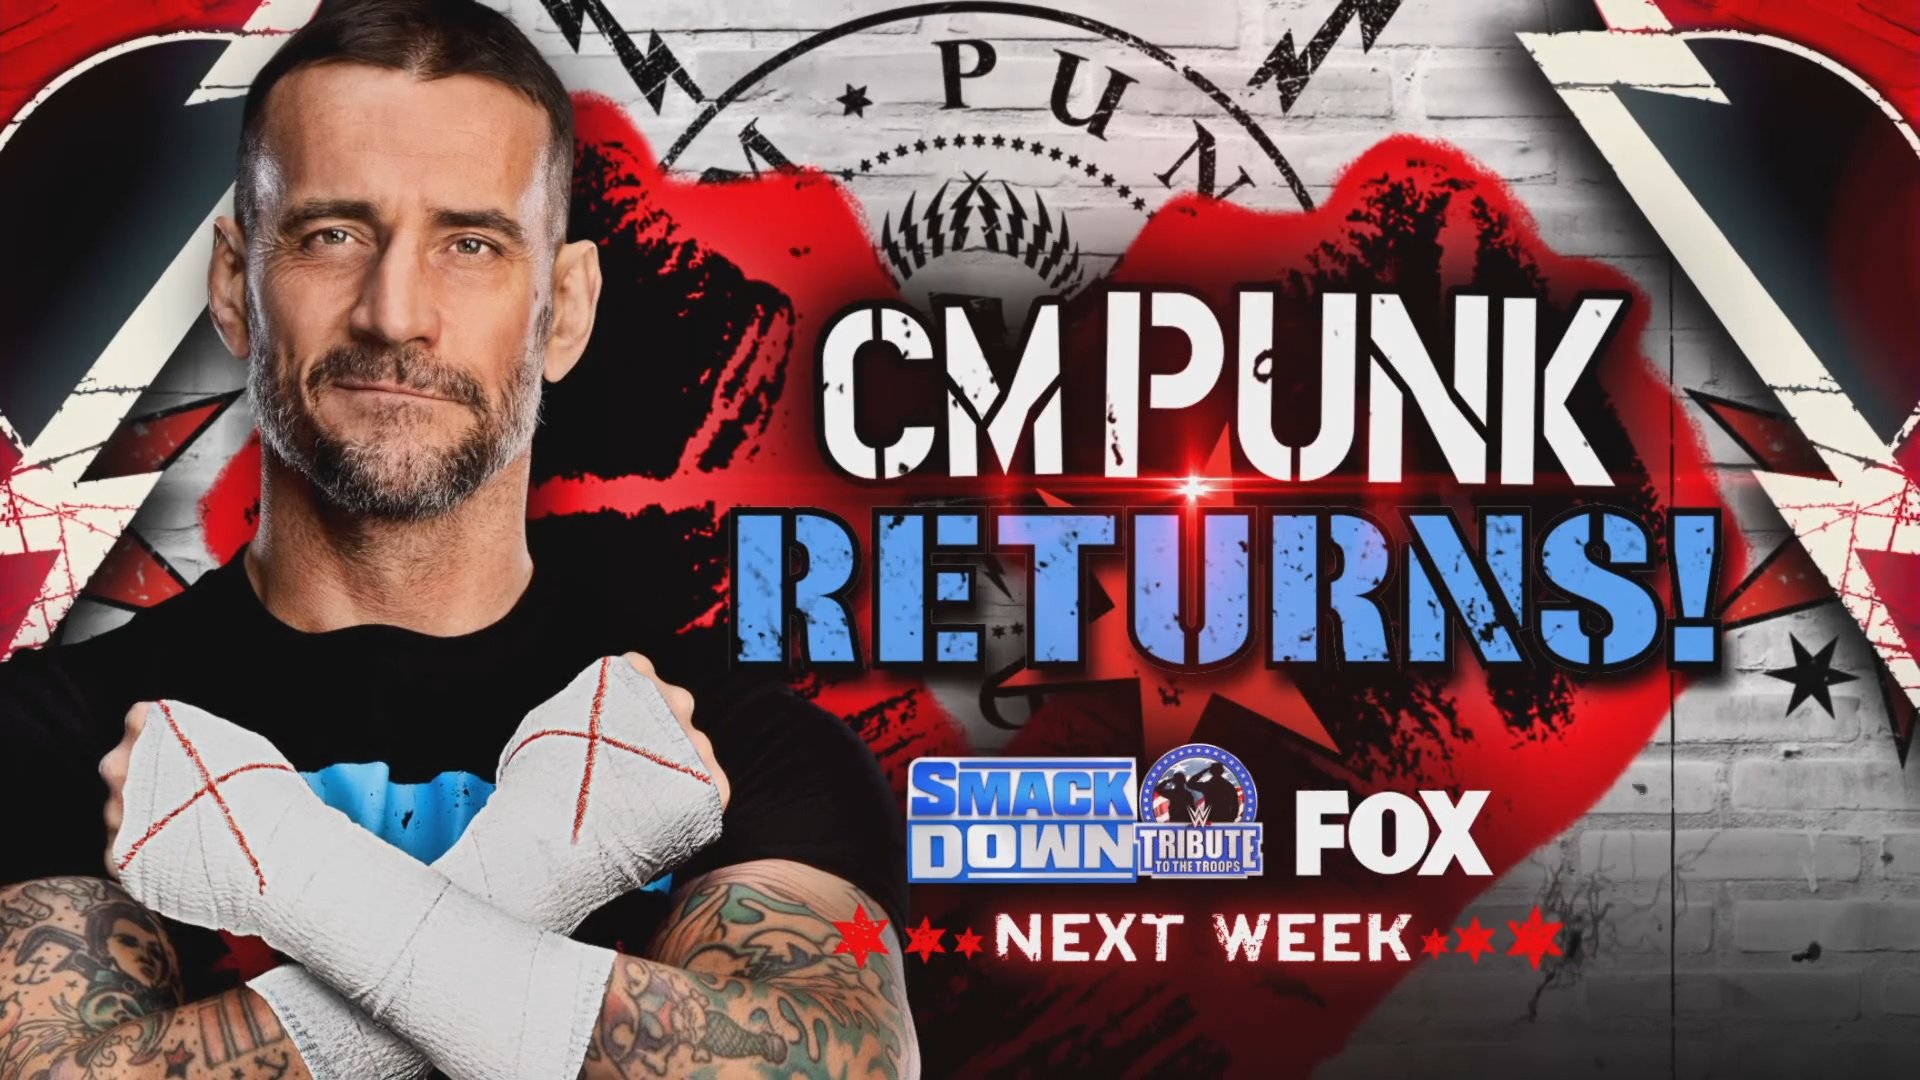 Promotional graphic advertising the return of CM Punk Matches to WWE SmackDown.